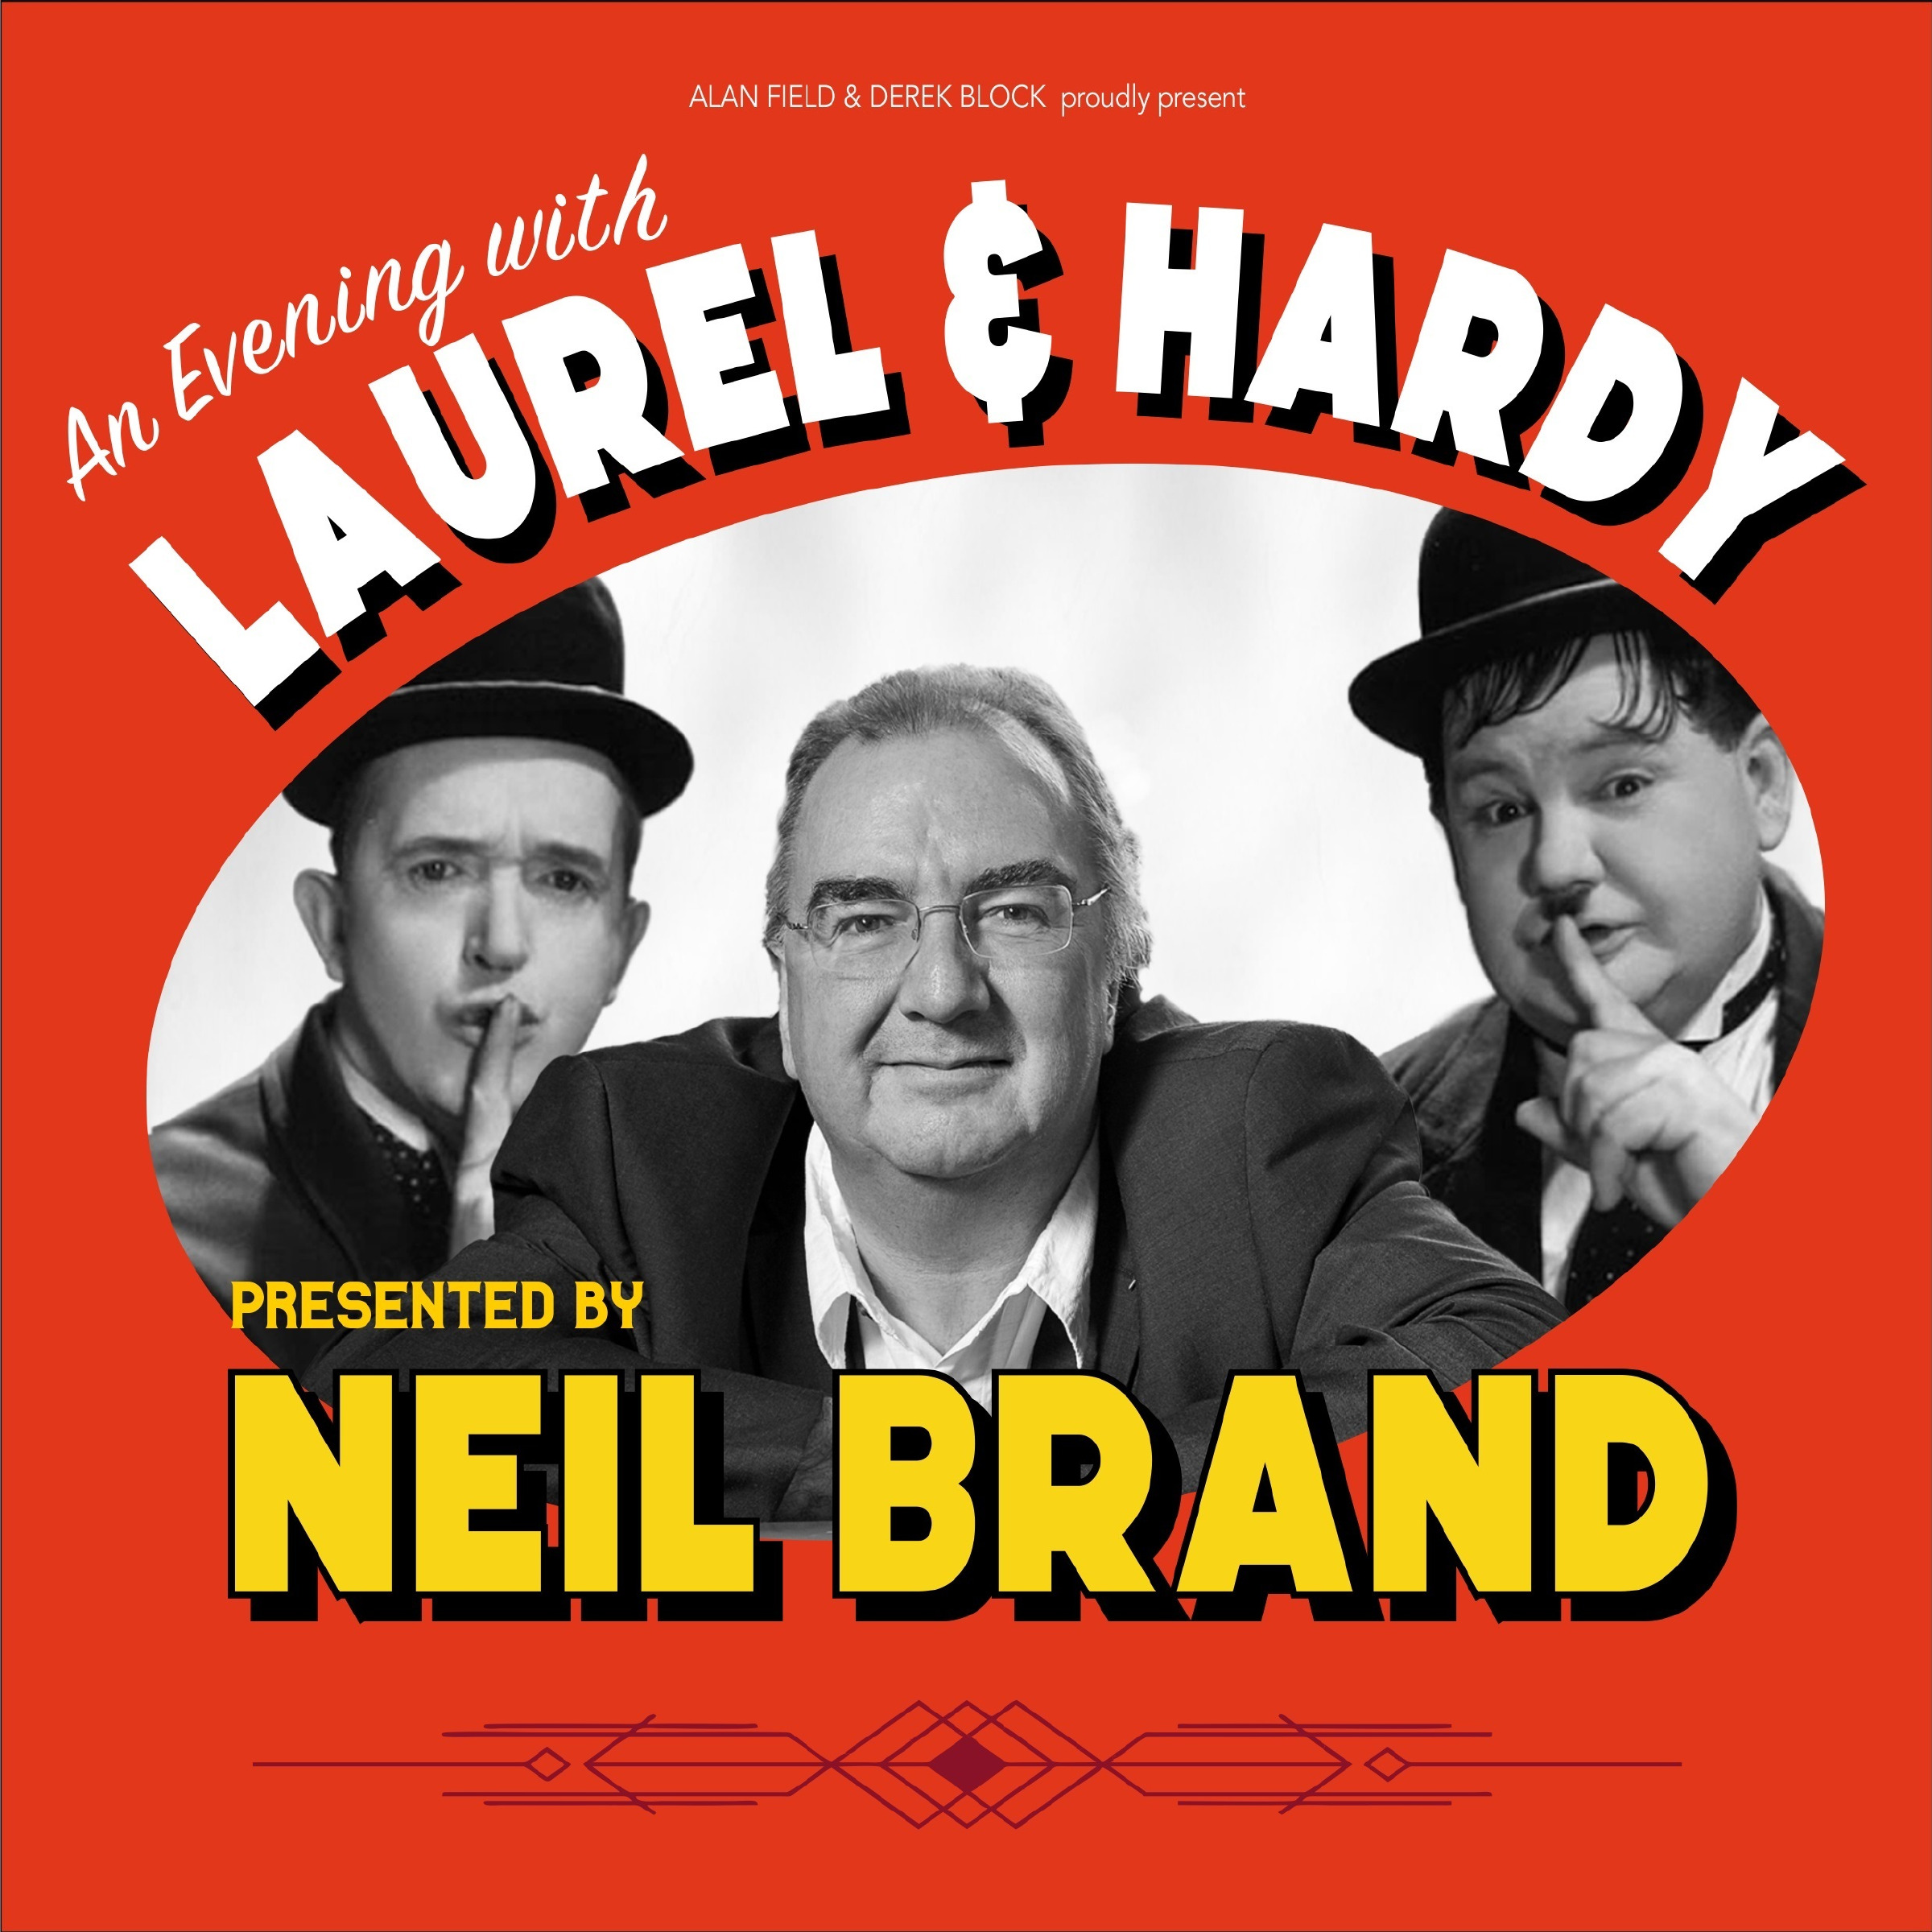 An Evening with Laurel & Hardy presented by Neil Brand